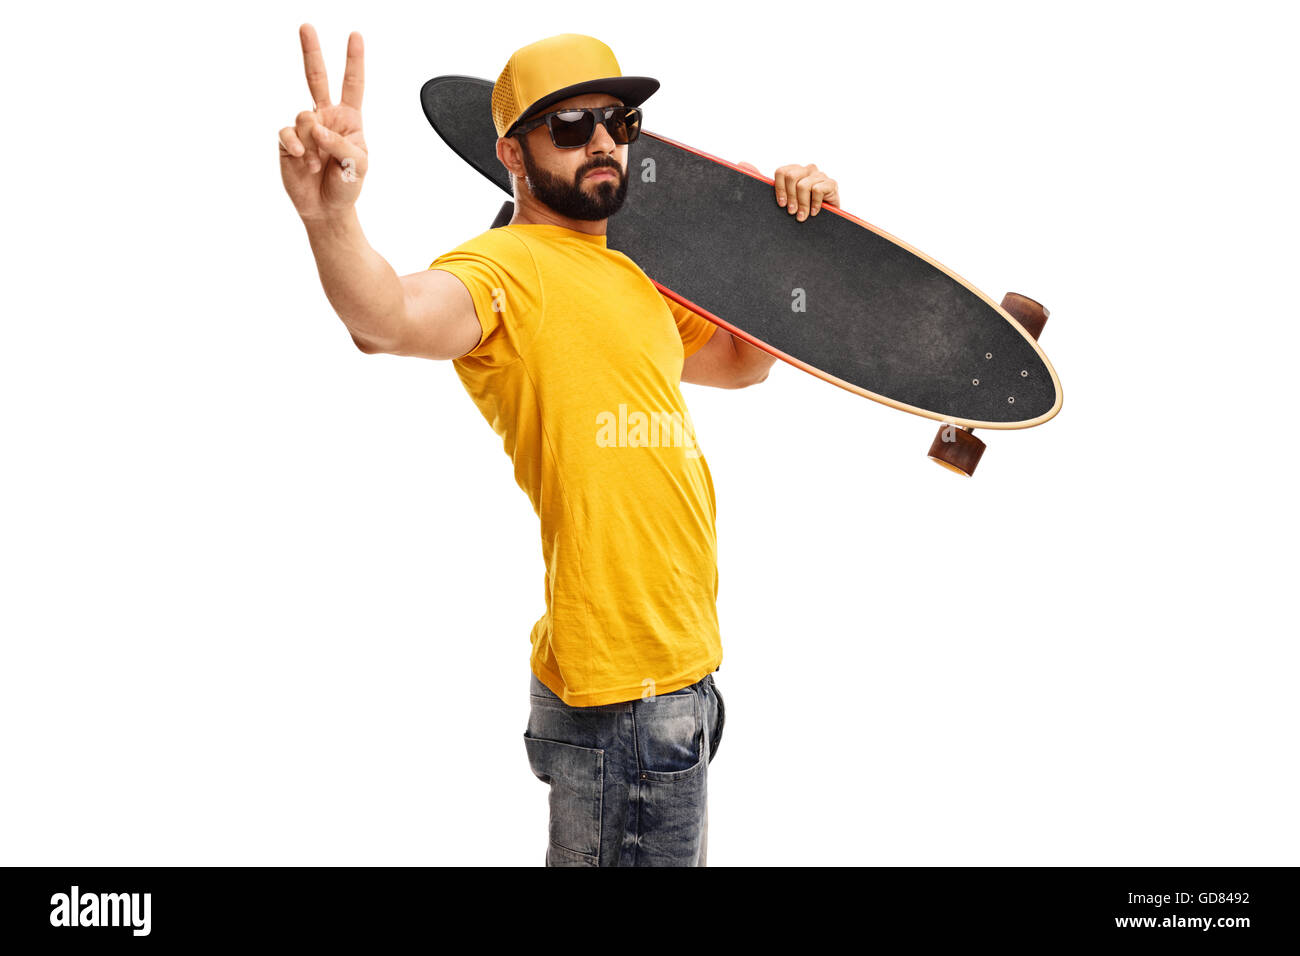 Cool skater guy holding a longboard and making a peace sign with his hand  isolated on white background Stock Photo - Alamy